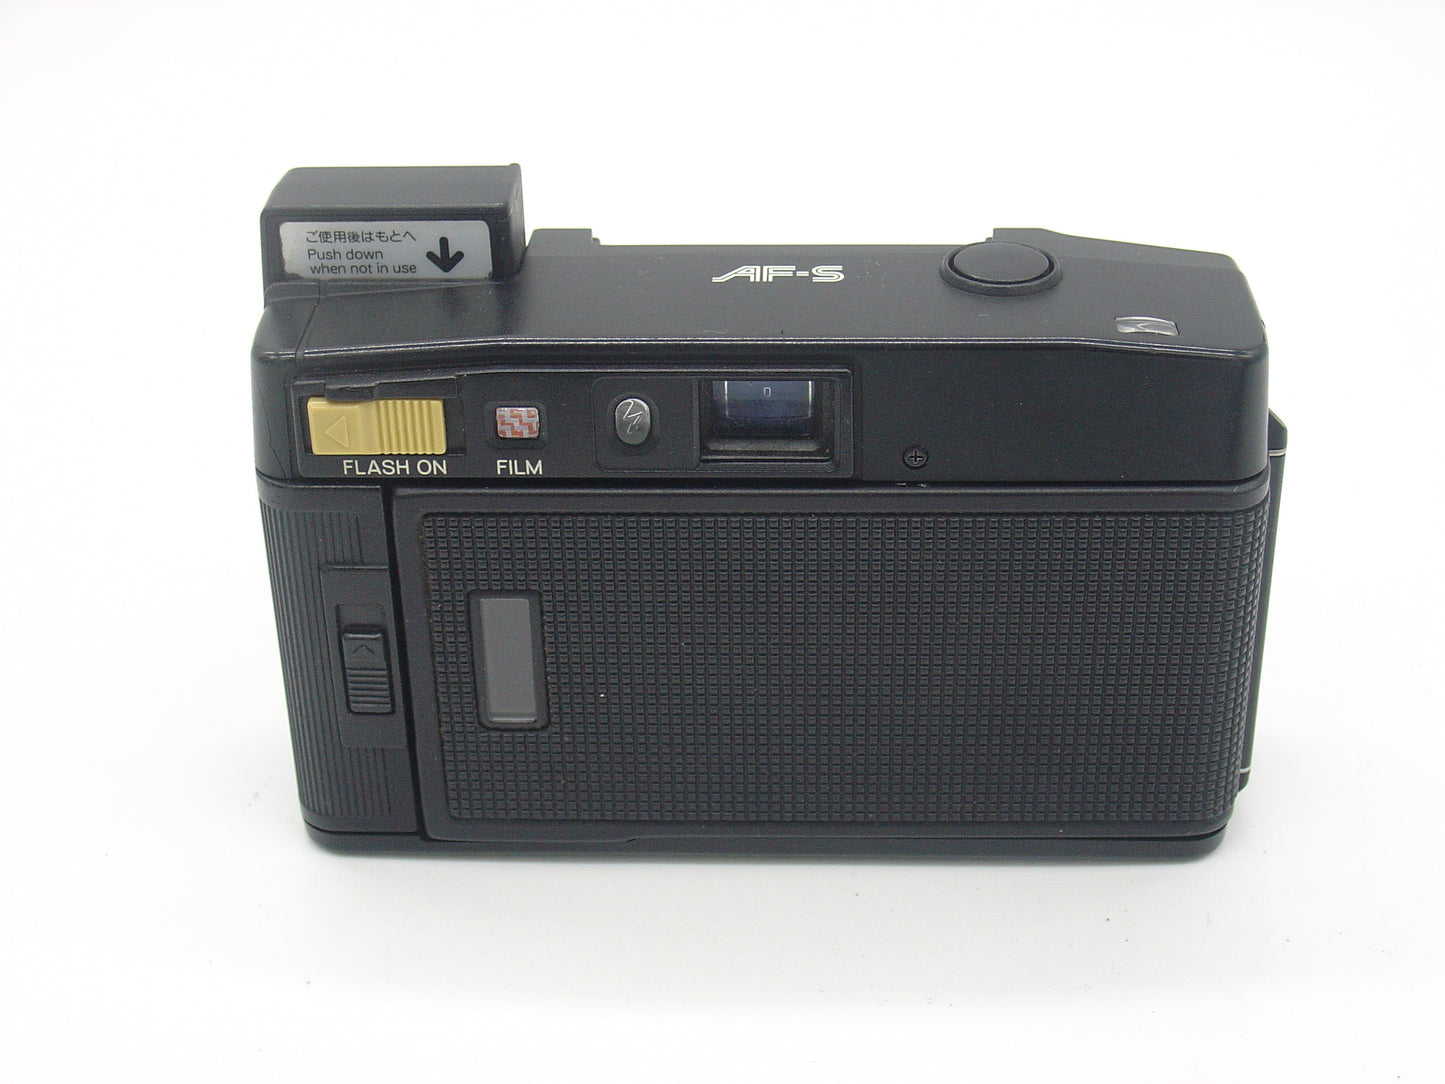 Minolta AF-S point-and-shoot camera